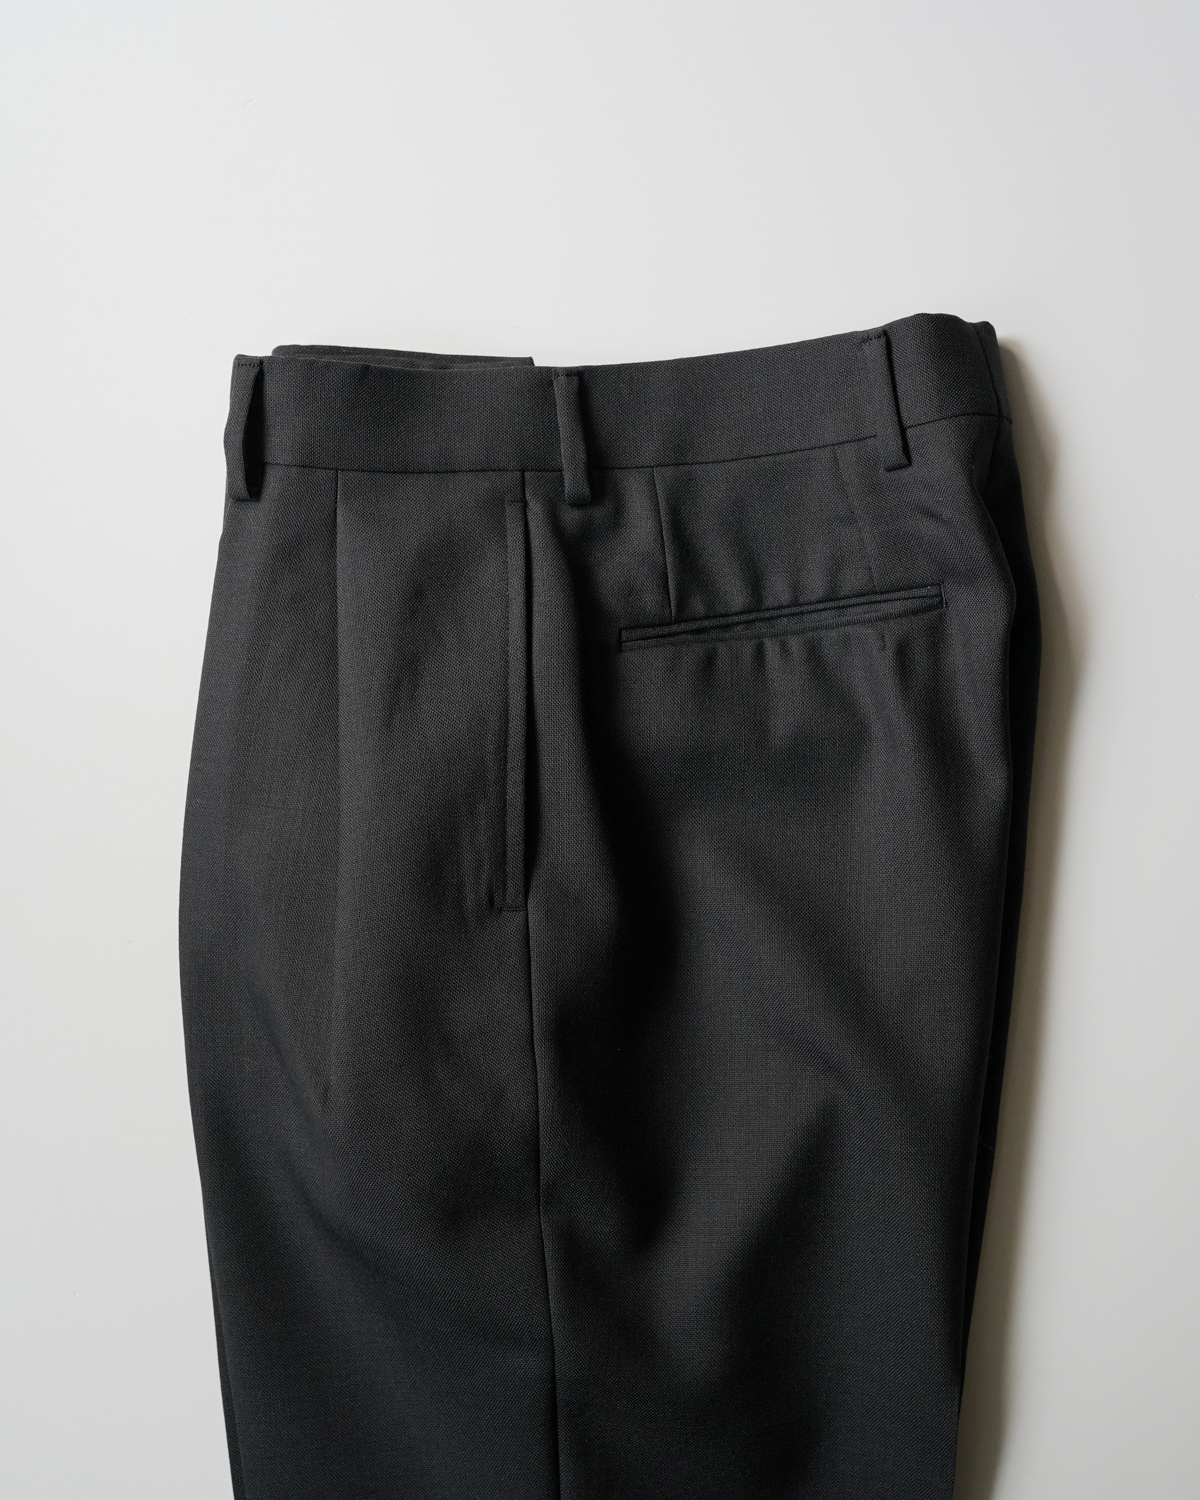 NEAT｜WOOL HOPSACK｜STANDARD TYPE Ⅰ - Black｜PRODUCT｜Continuer 